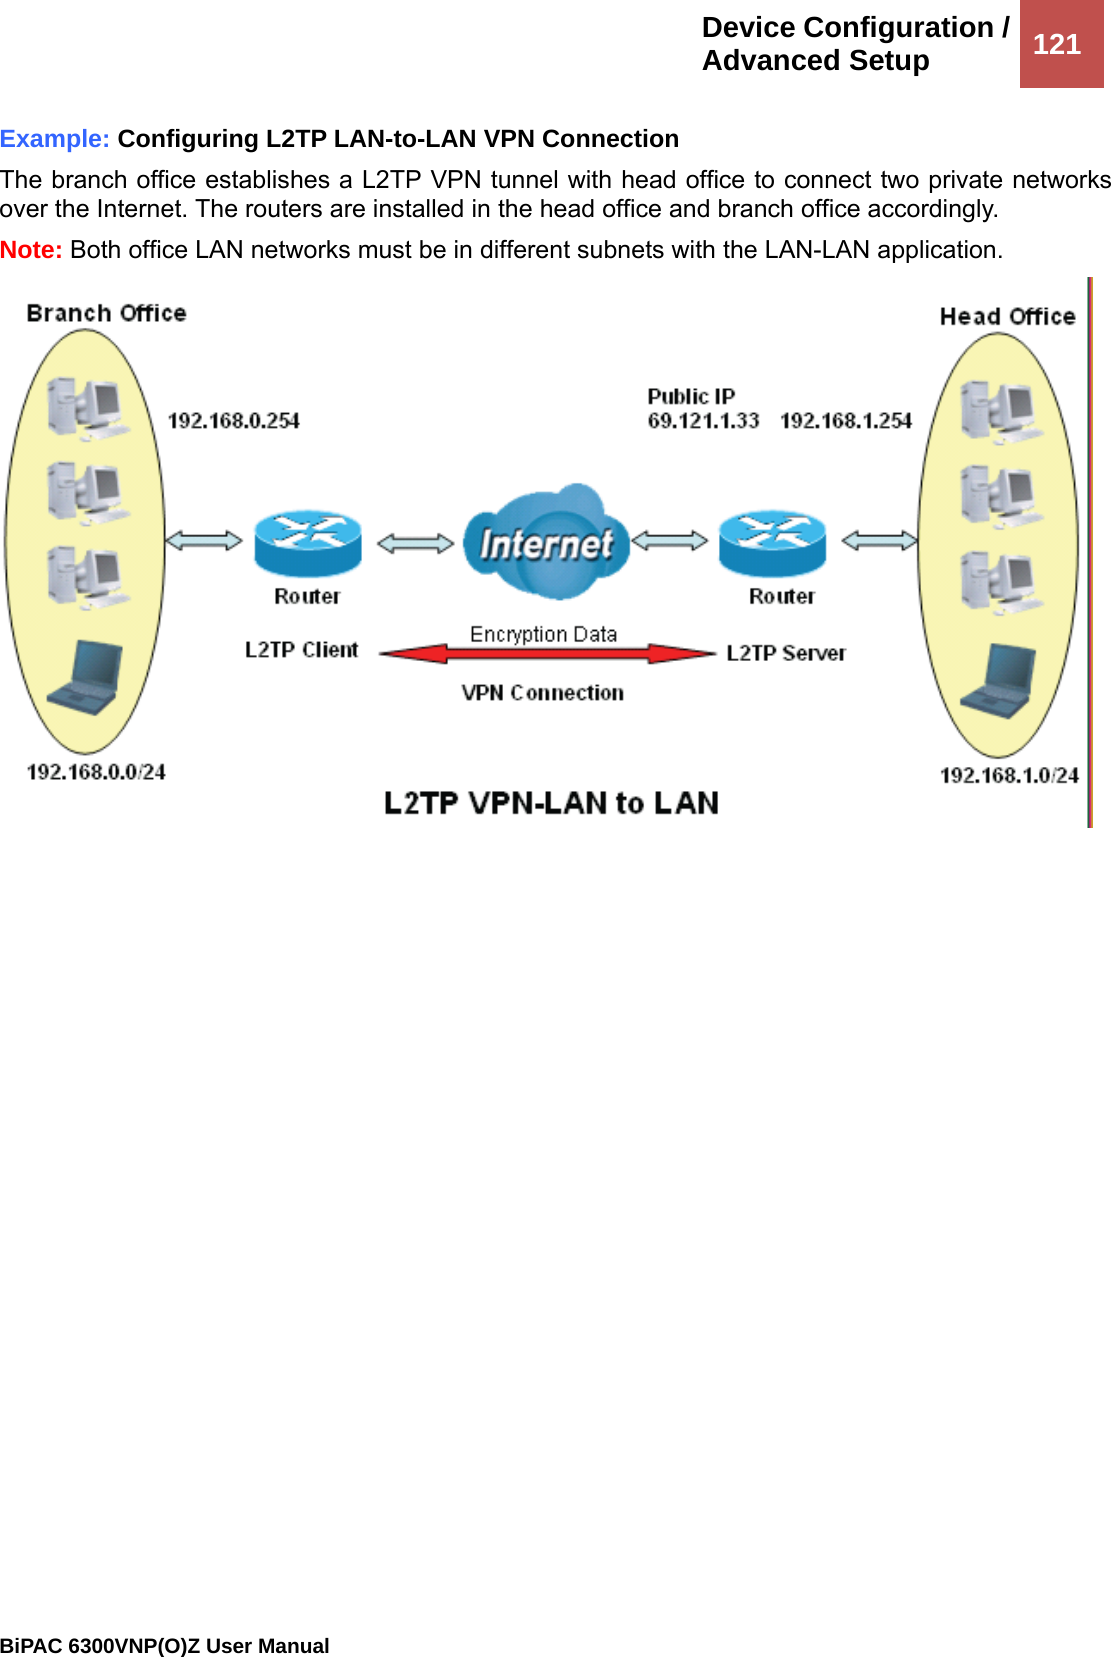 Device Configuration /Advanced Setup  121                                                BiPAC 6300VNP(O)Z User Manual  Example: Configuring L2TP LAN-to-LAN VPN Connection The branch office establishes a L2TP VPN tunnel with head office to connect two private networks over the Internet. The routers are installed in the head office and branch office accordingly. Note: Both office LAN networks must be in different subnets with the LAN-LAN application.   